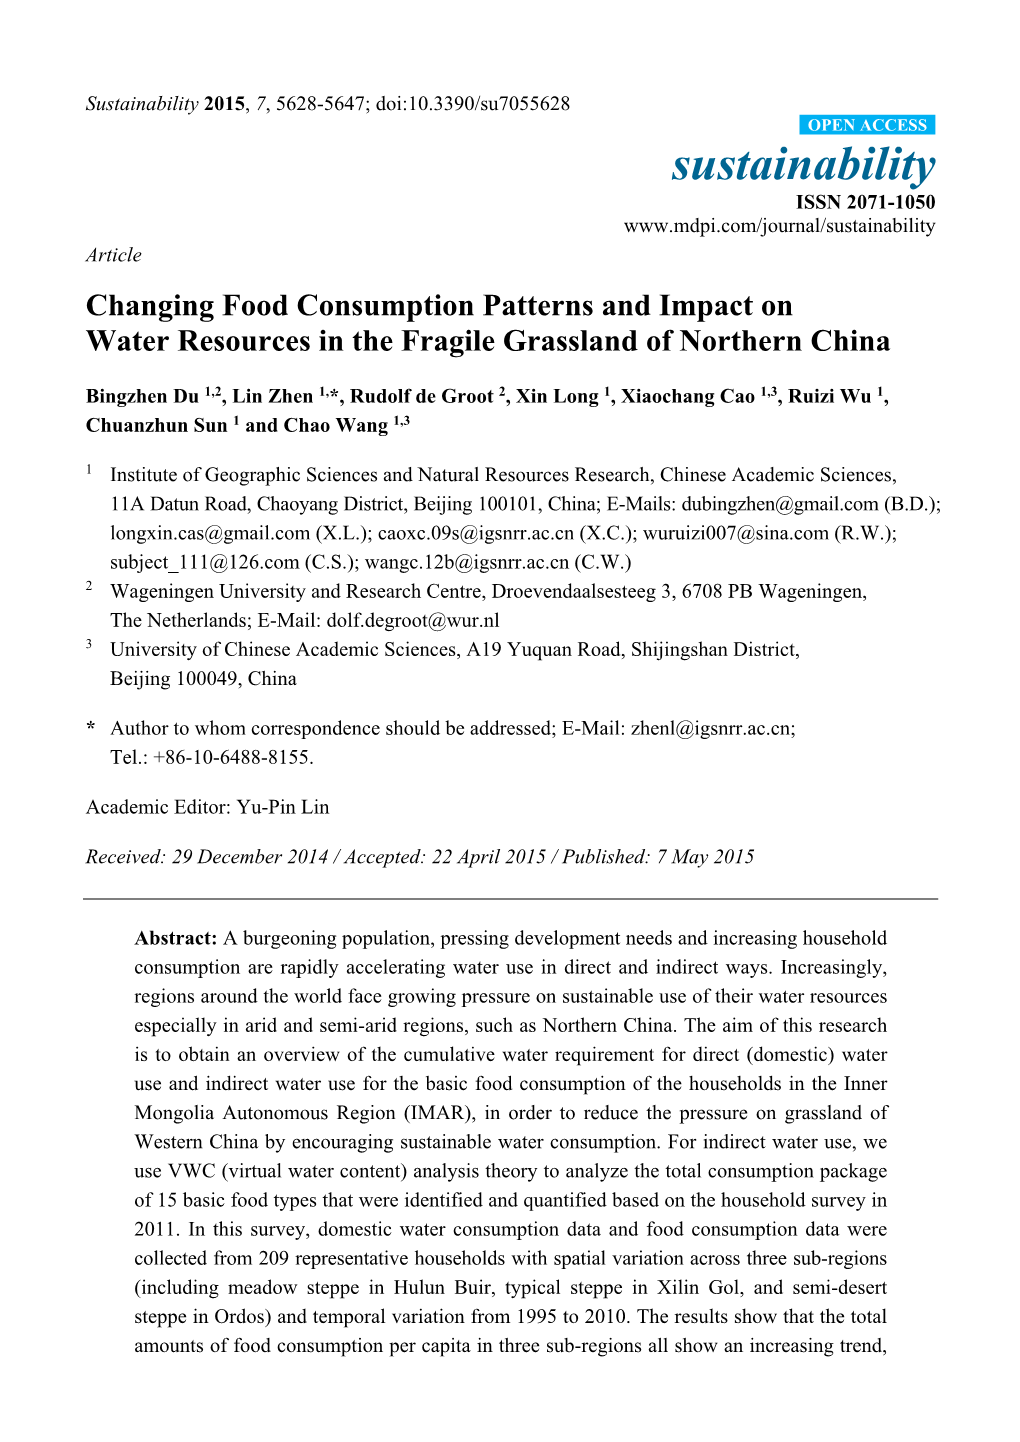 Changing Food Consumption Patterns and Impact on Water Resources in the Fragile Grassland of Northern China